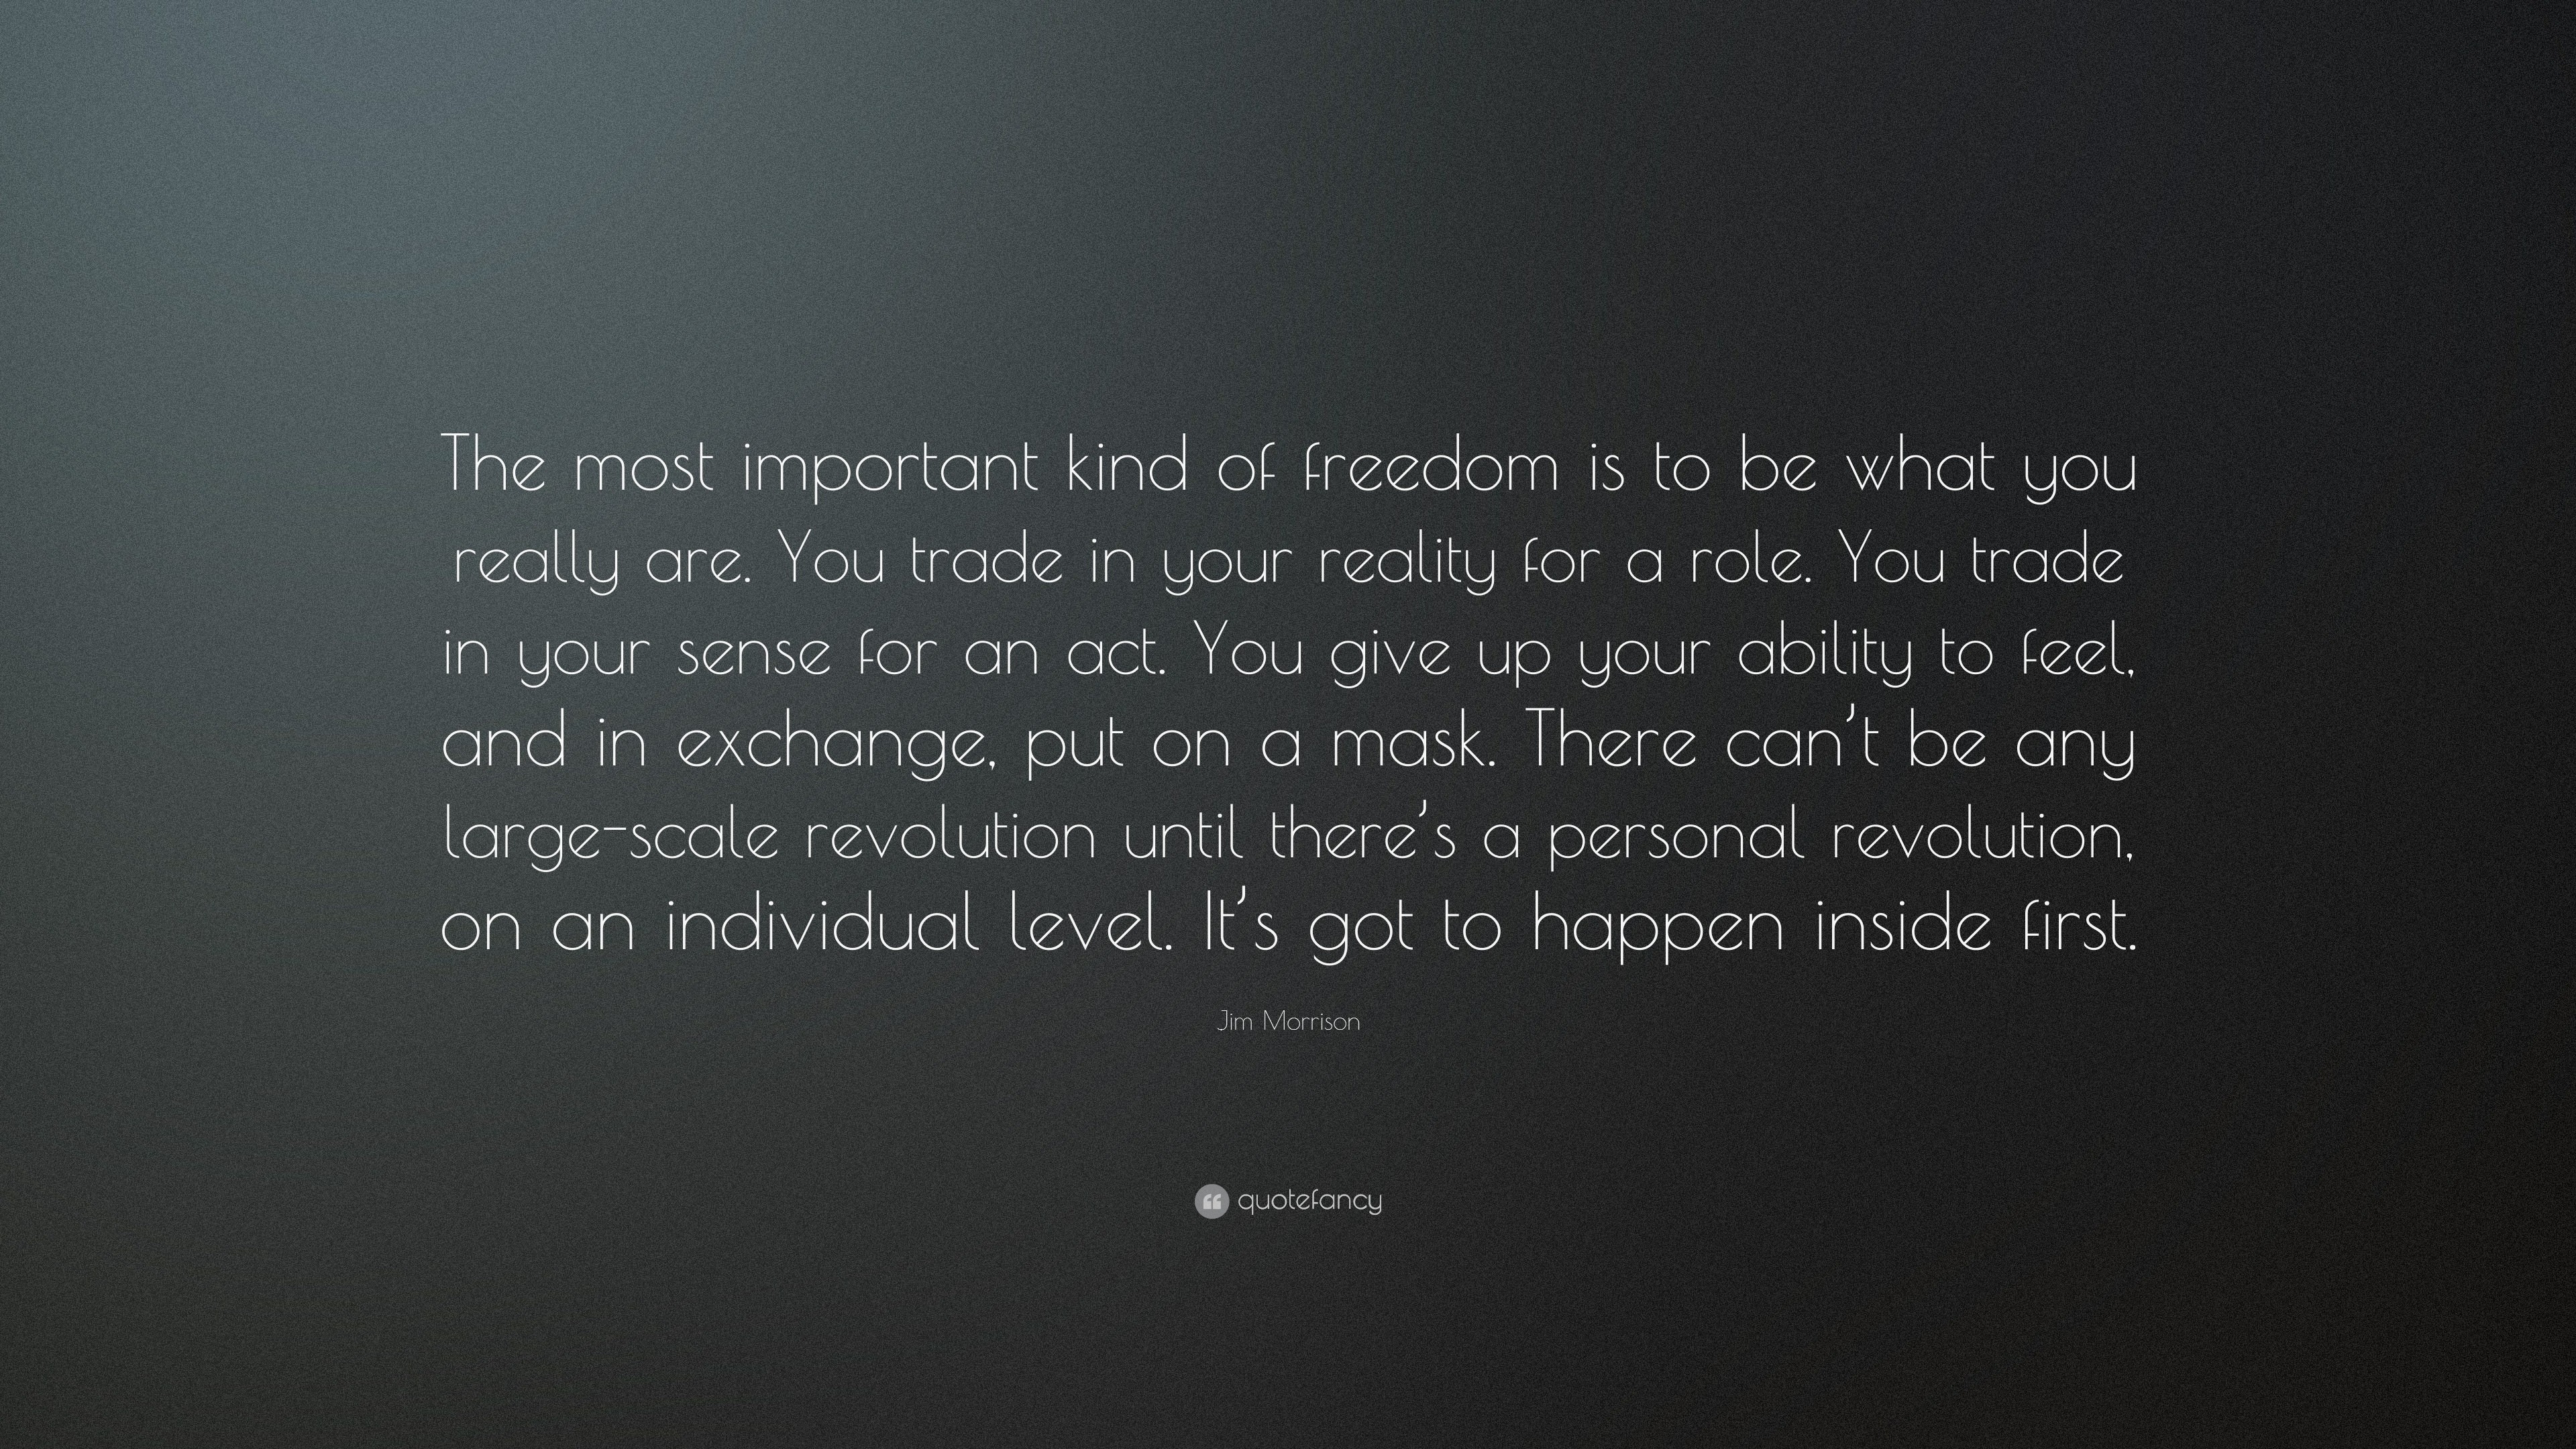 3840x2160 Jim Morrison Quote: “The most important kind of freedom is to be what you